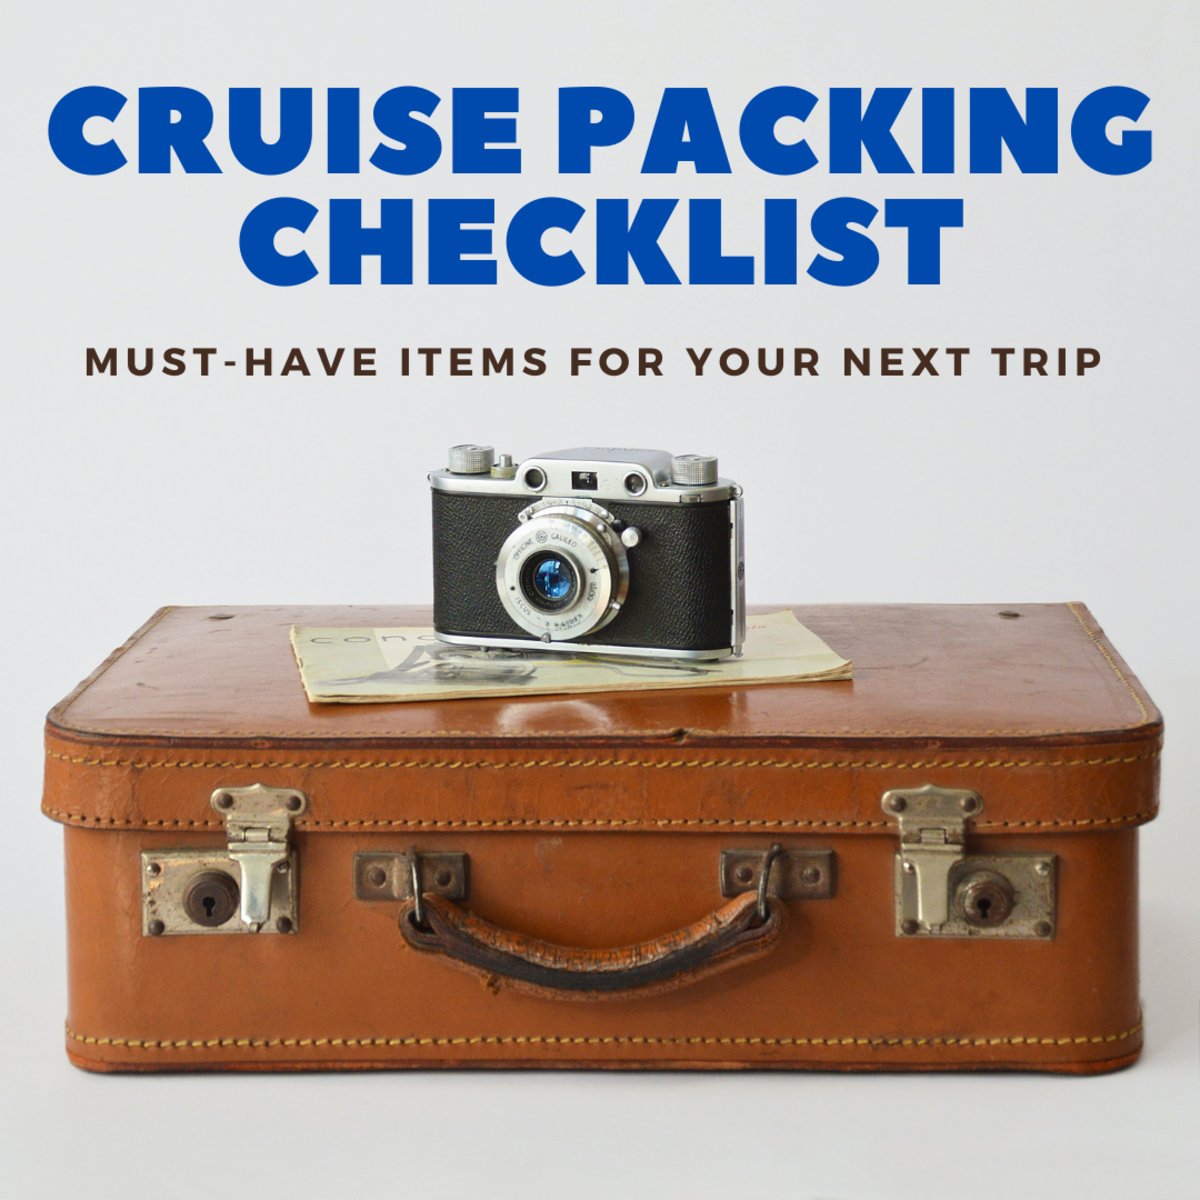 https://images.saymedia-content.com/.image/t_share/MTc3NTg1ODAwODM2Mjk0MjUz/33-useful-things-to-pack-for-your-cruise.png